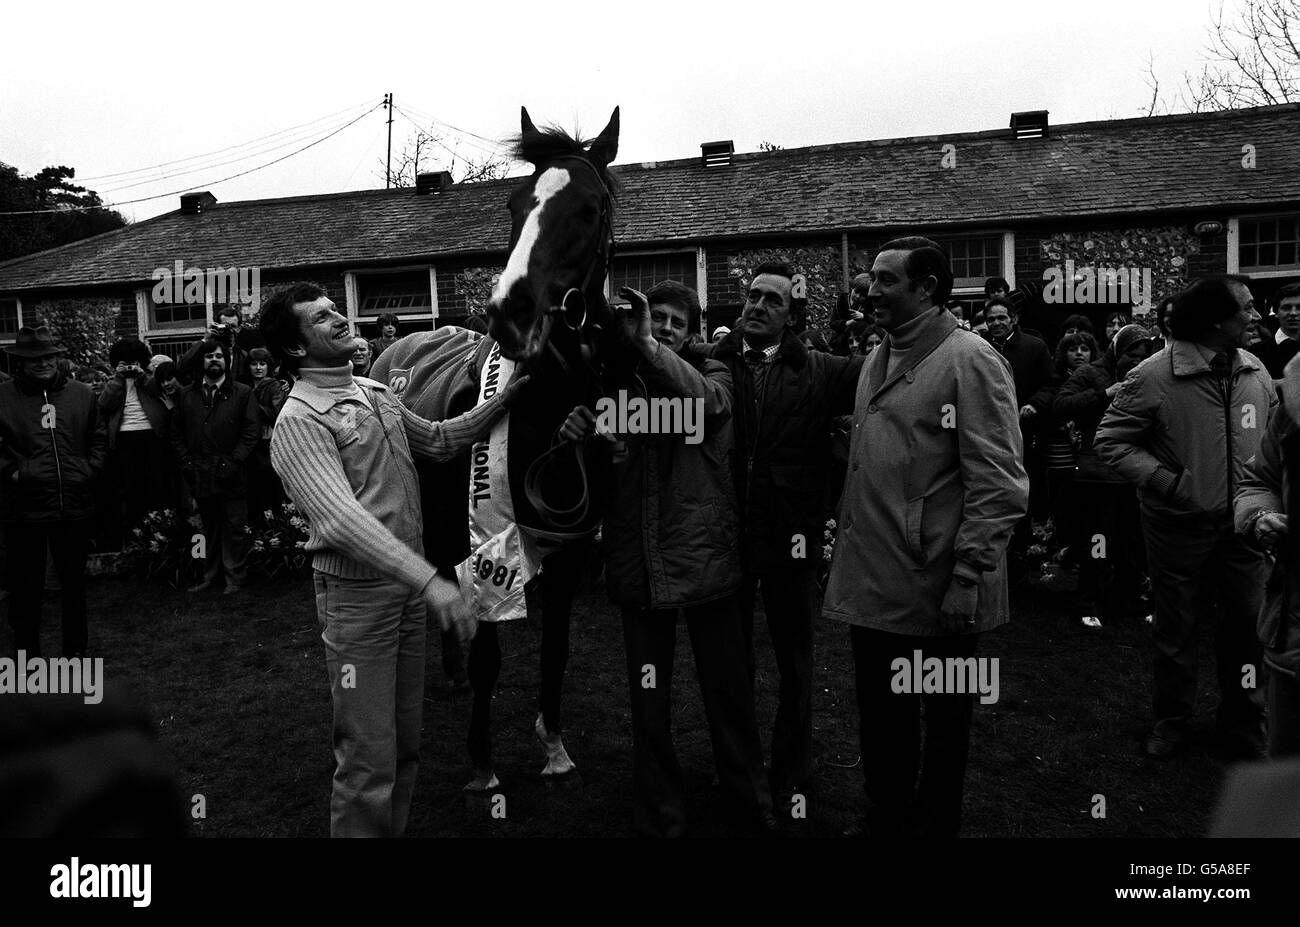 MAKING A HERO'S RETURN TO THE GIFFORD STABLES AT THE SUSSEX VILLAGE OF FINDON IS ALDANITI, THE WINNER OF YESTERDAY'S GRAND NATIONAL AT AINTREE. WITH THE 11 YEAR OLD GELDING ARE WINNING JOCKEY BOB CHAMPION (LEFT), HIS TRAINER JOSH GIFFORD (2ND RIGHT) AND THE OWNER NICK EMBIRICOS. Stock Photo